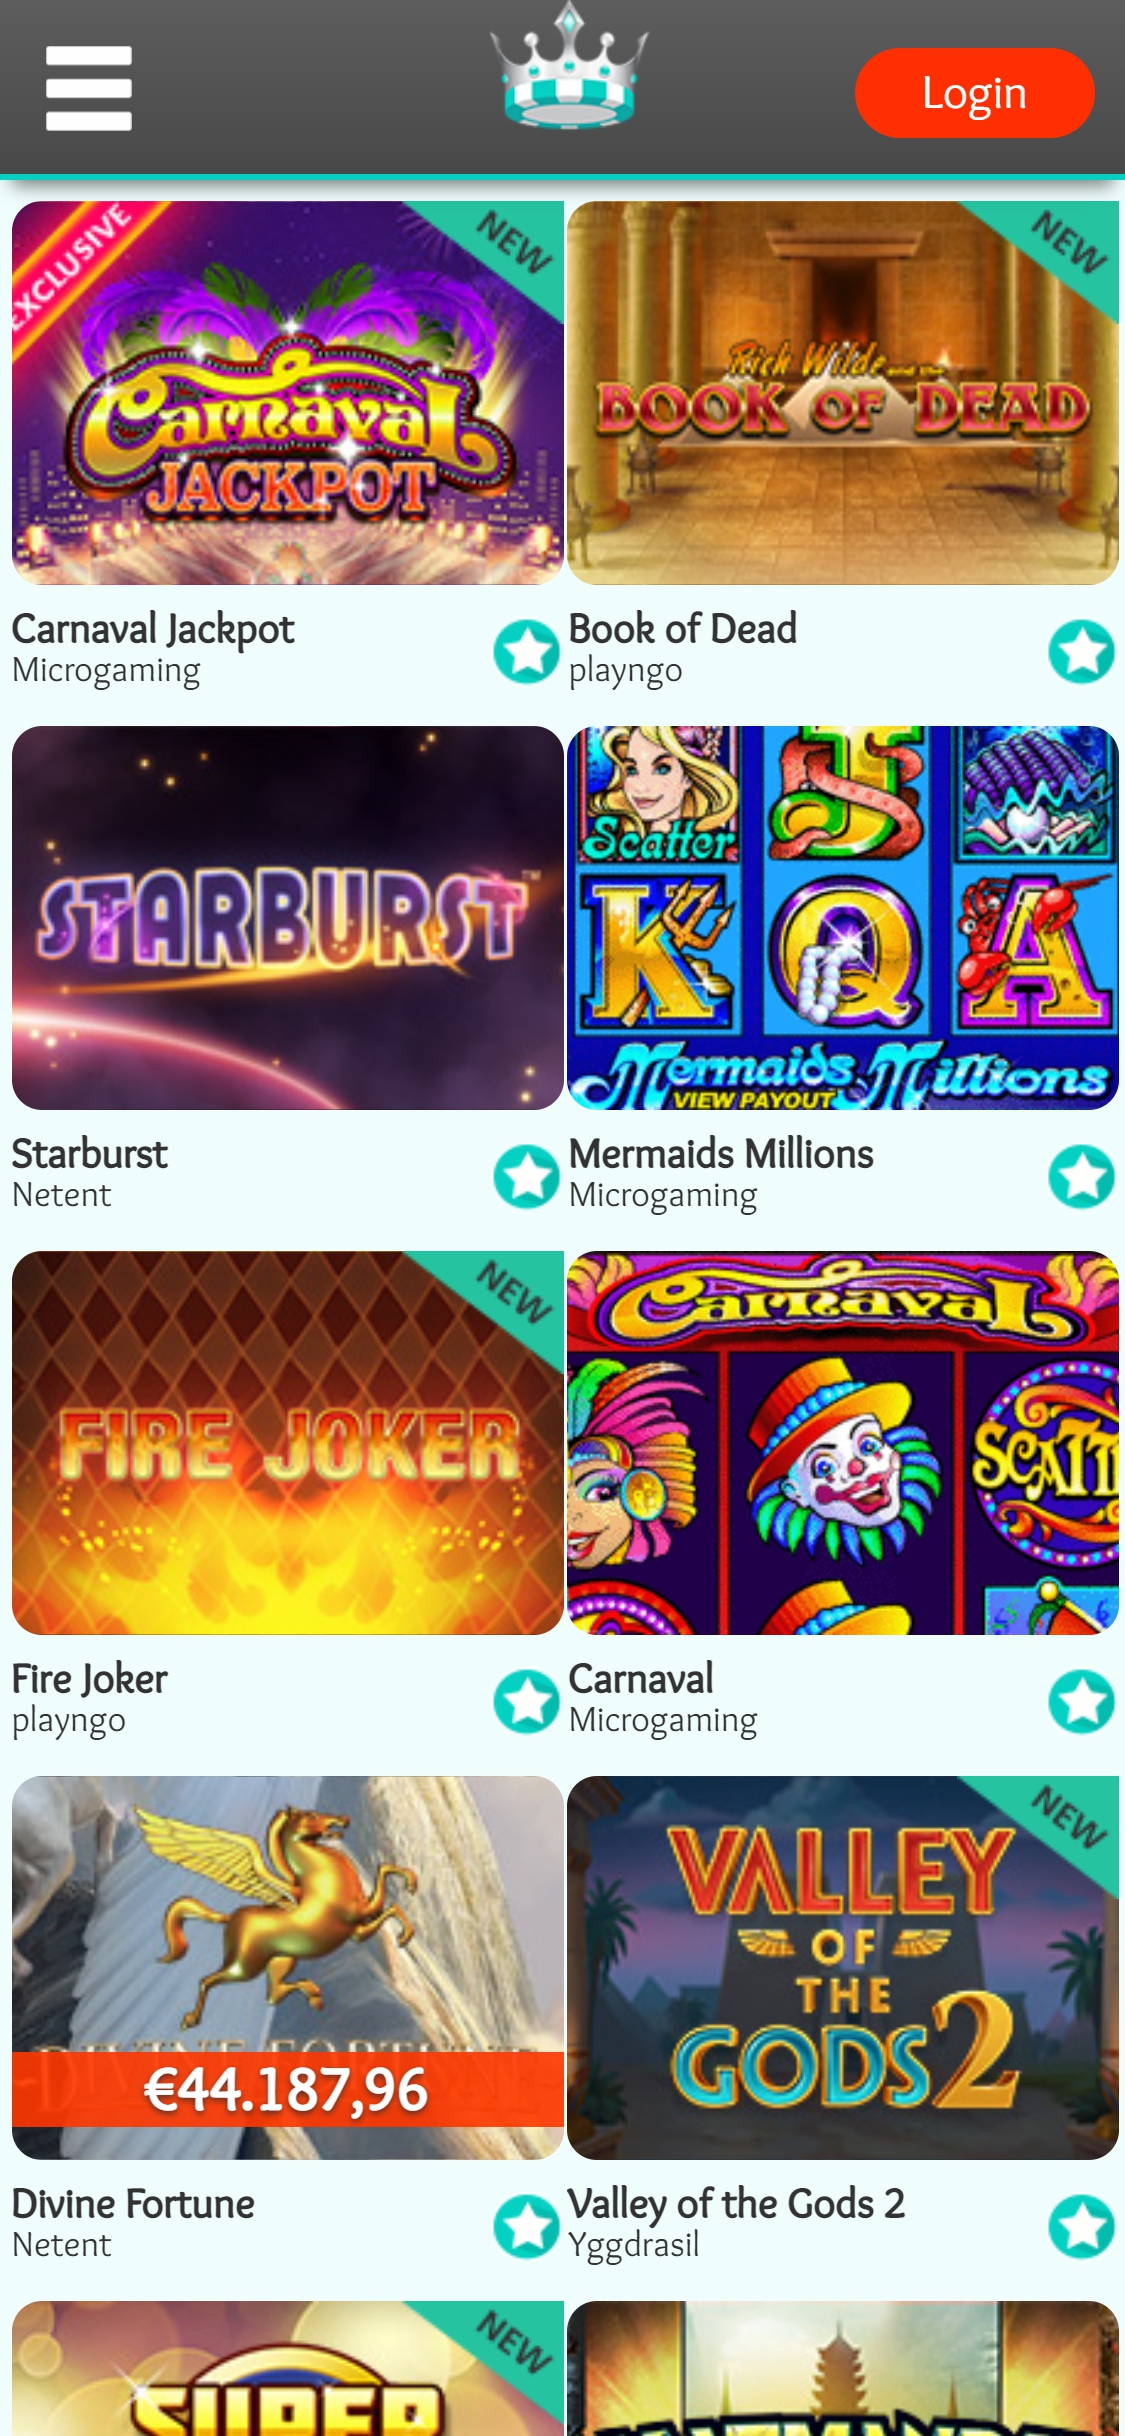 My Jackpot Casino Mobile Games Review